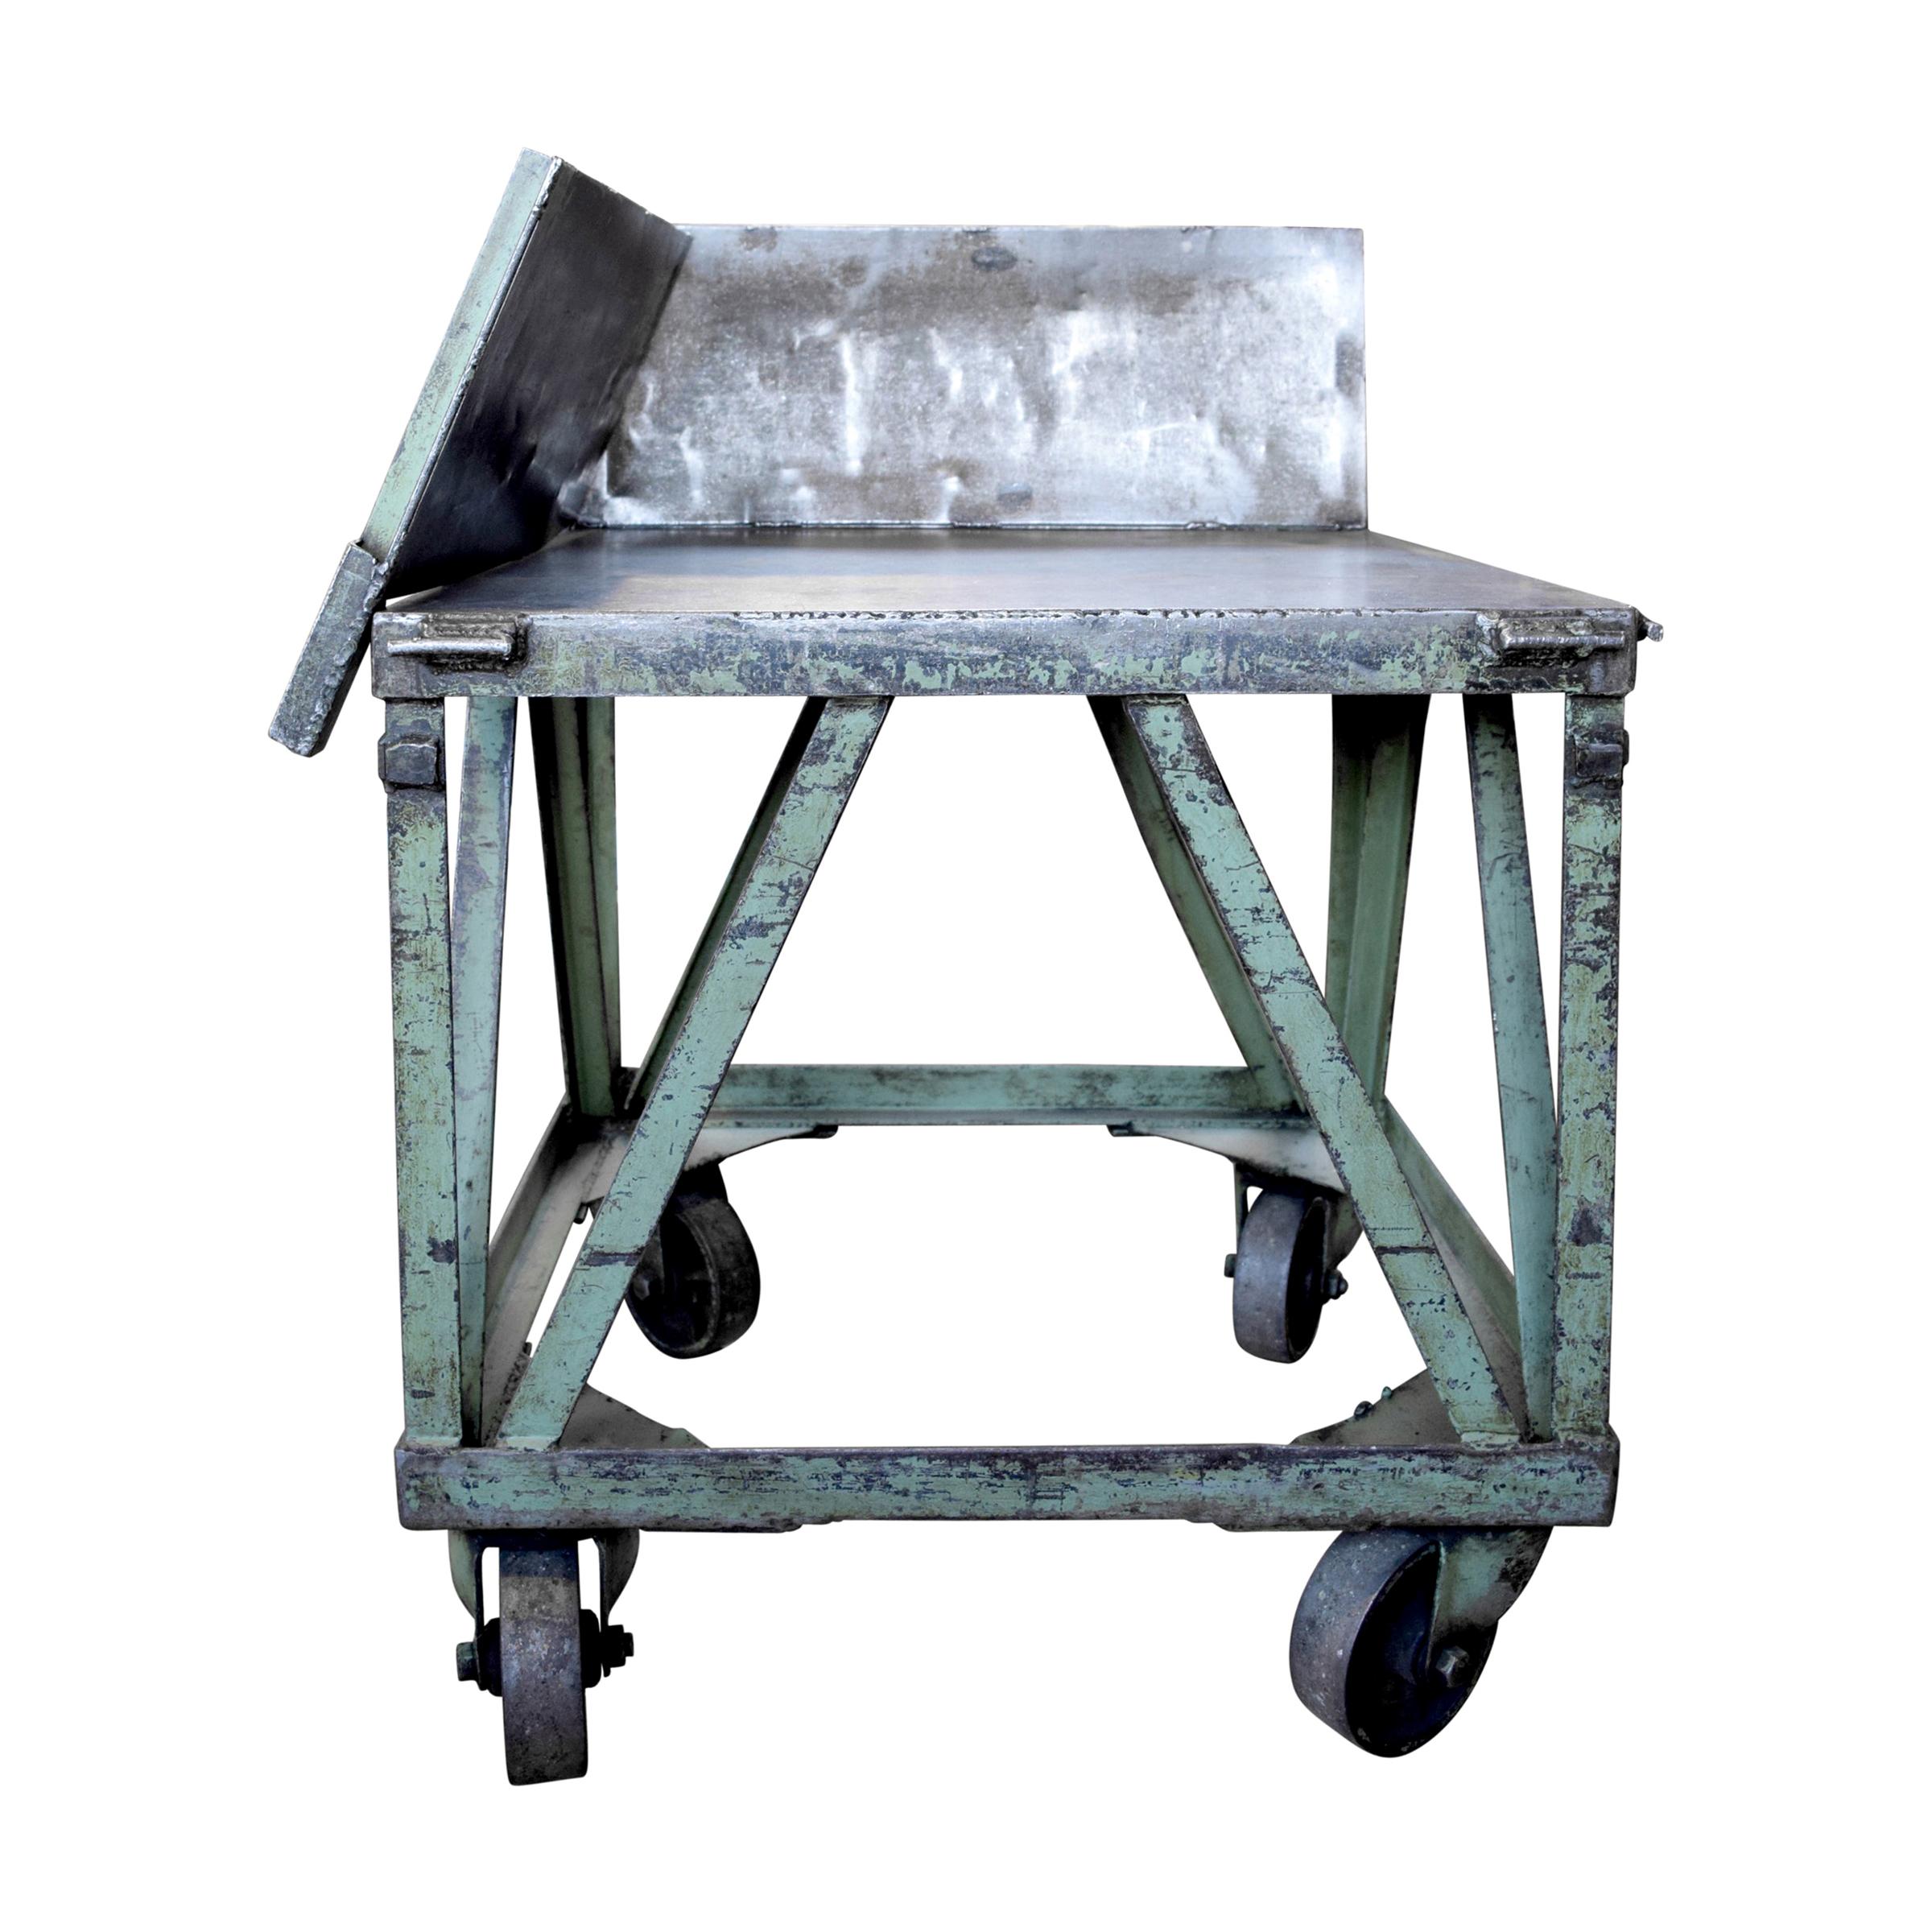 Early 20th Century American Industrial Cart from a Print Shop